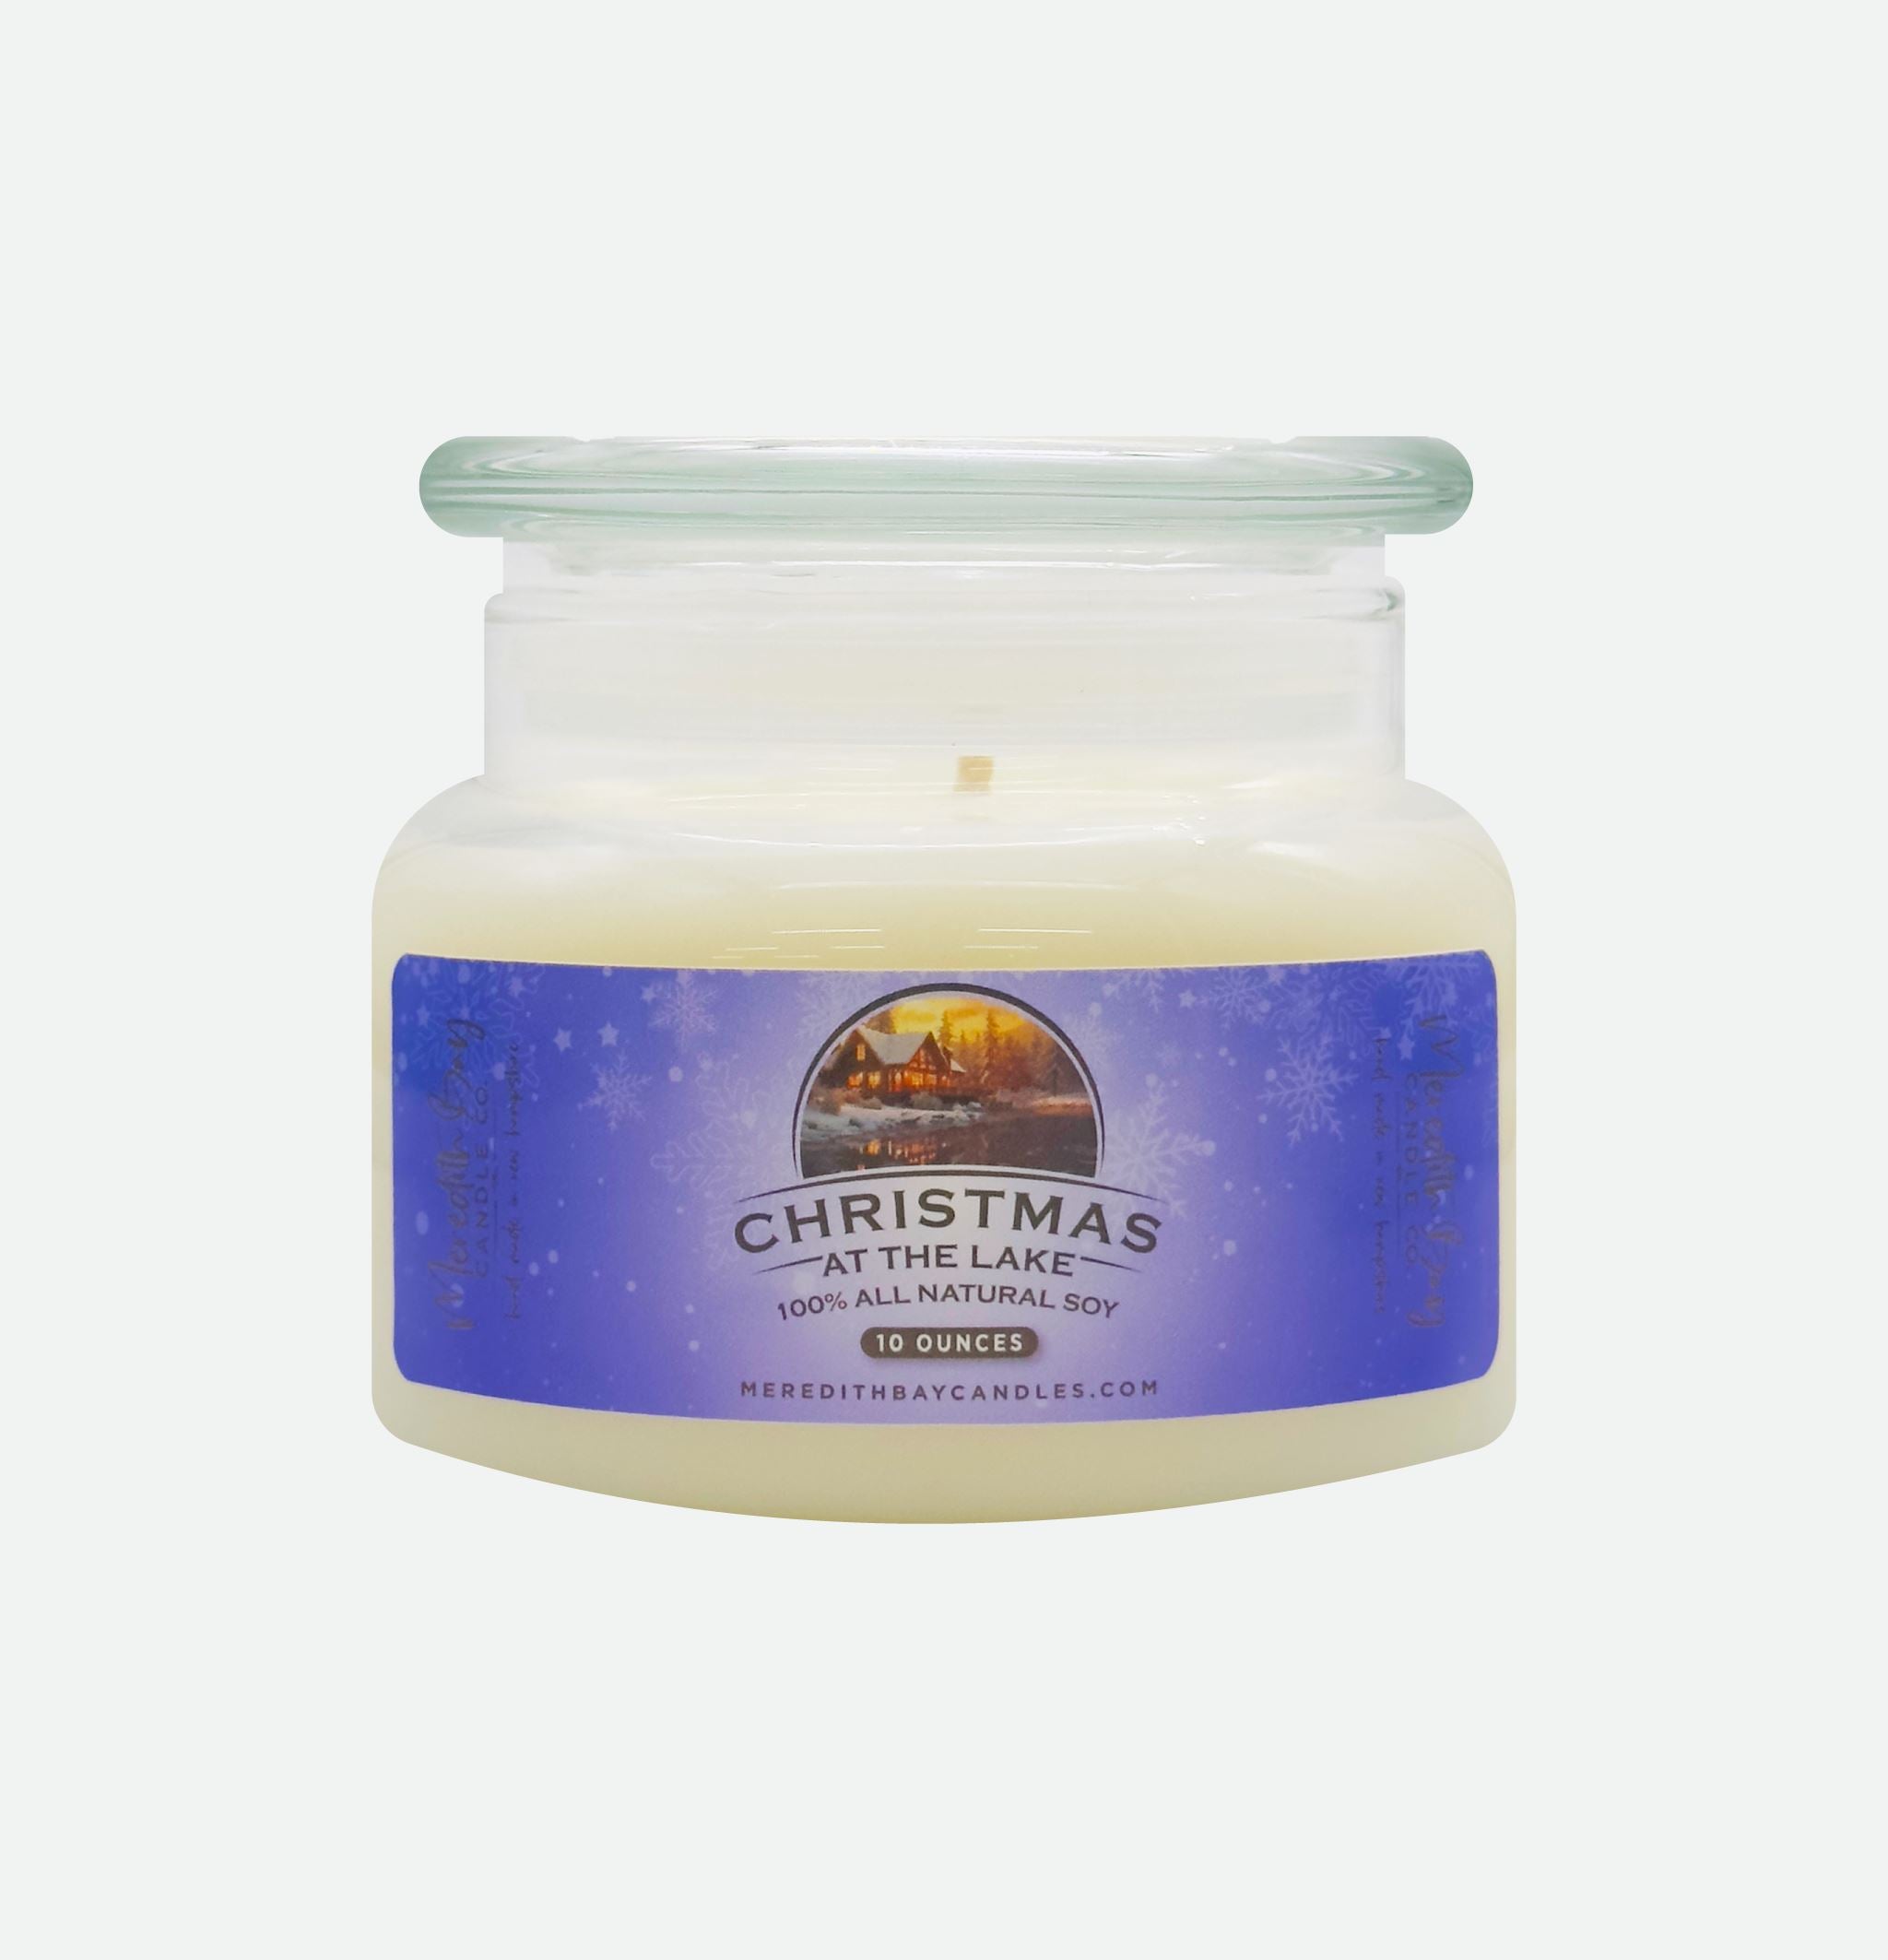 Christmas At The Lake Soy Candle Meredith Bay Candle Co 10 Oz 